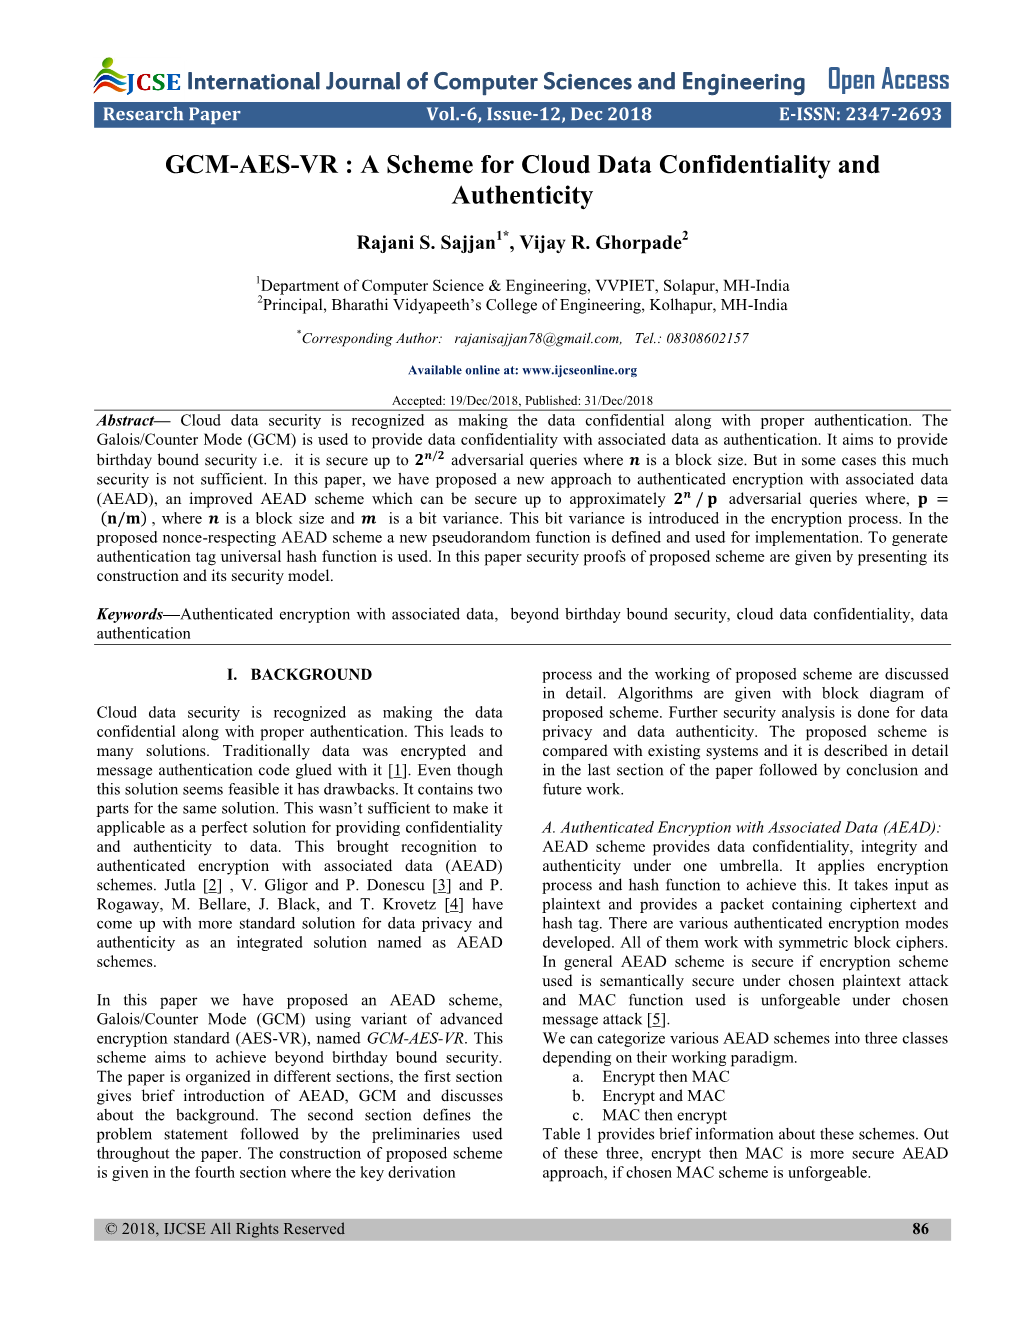 GCM-AES-VR : a Scheme for Cloud Data Confidentiality and Authenticity